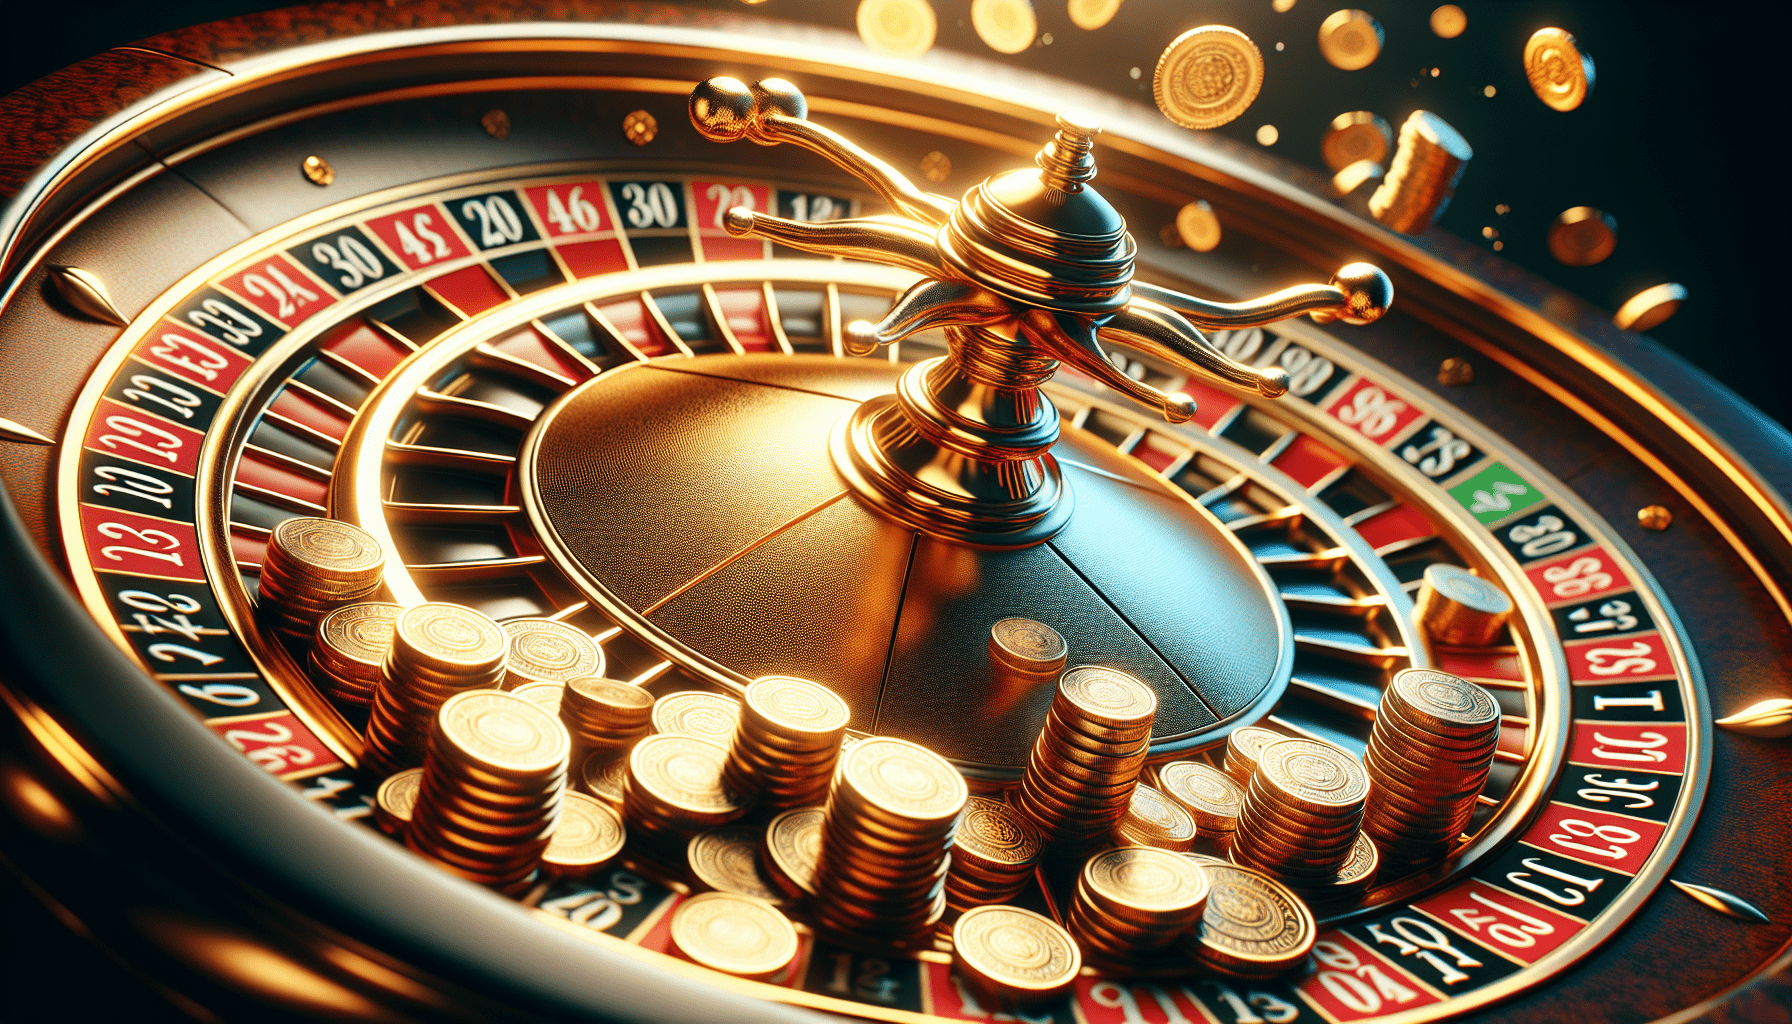 Can You Actually Make Money From Gambling?